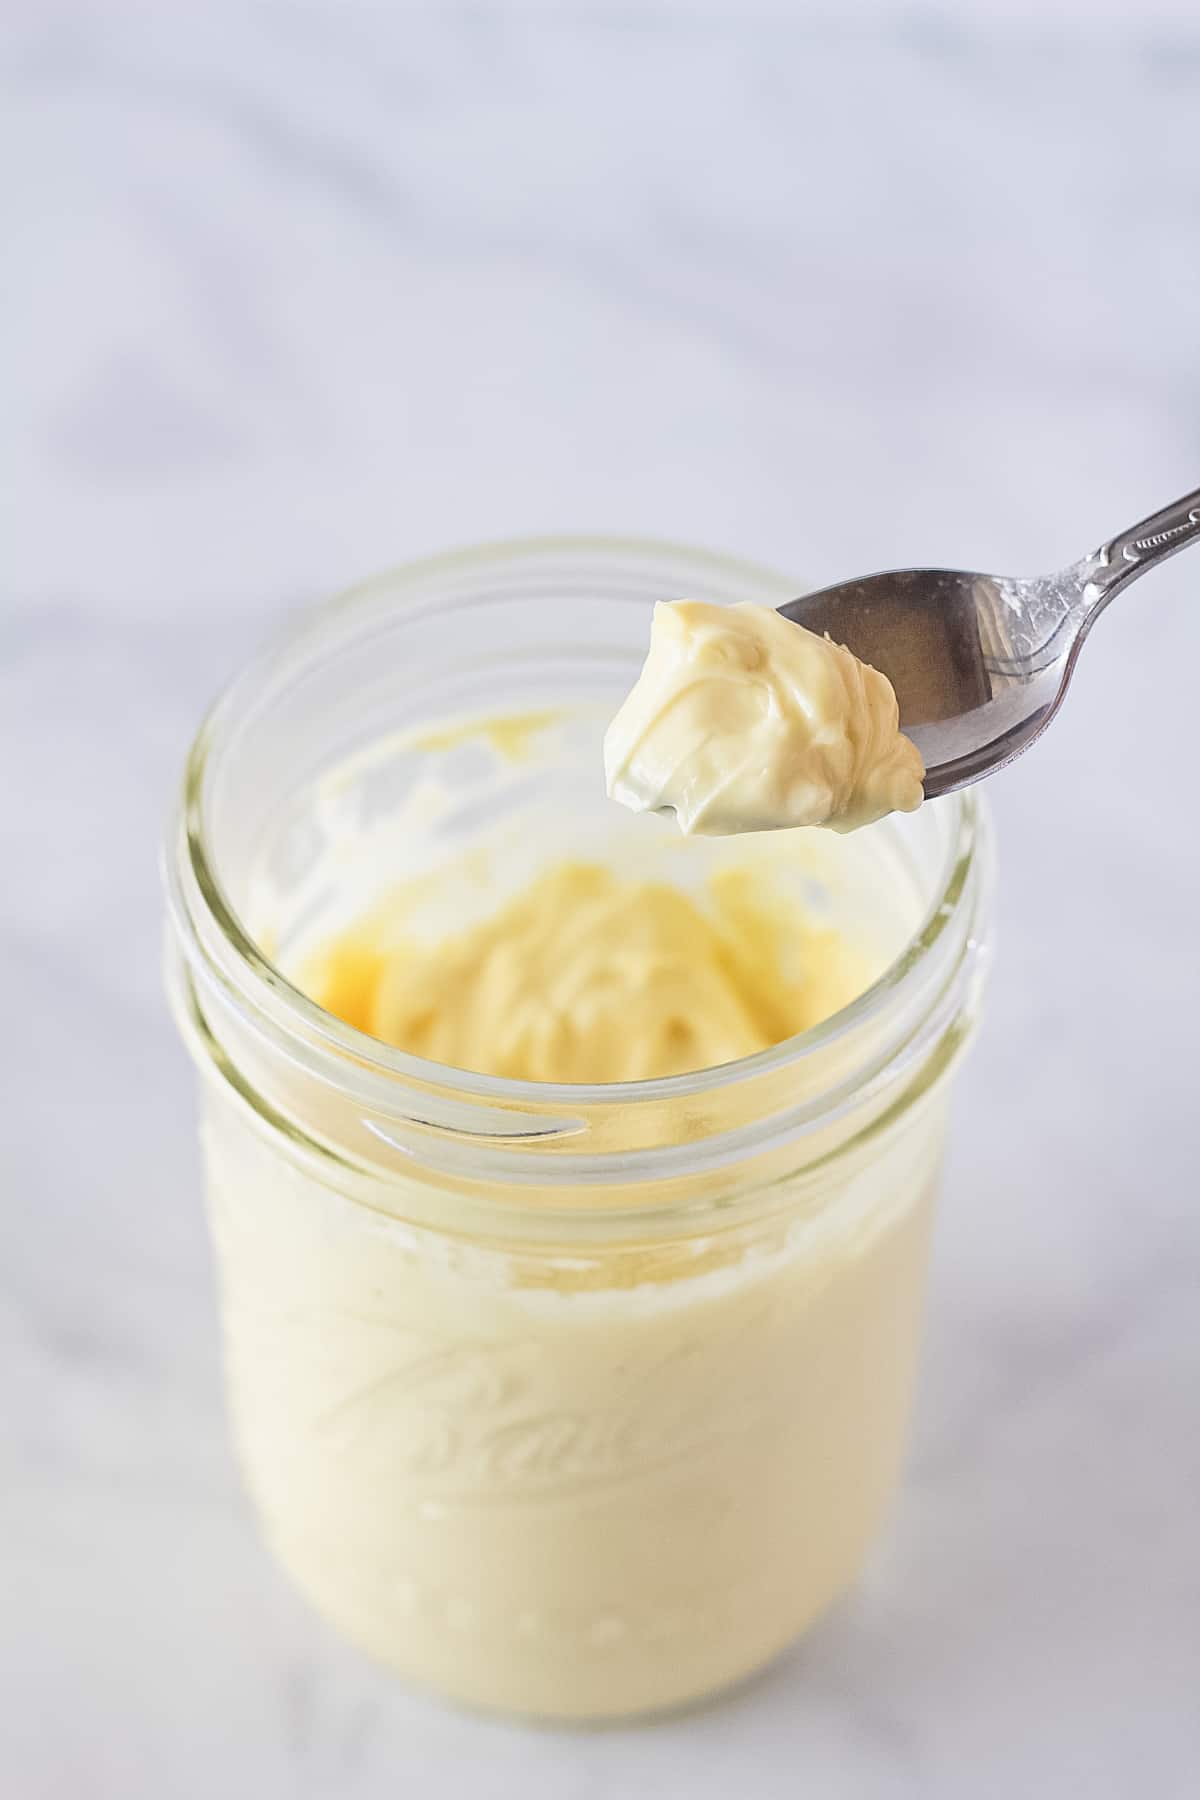 Homemade Mayo being scooped out of a mason jar with a spoon.